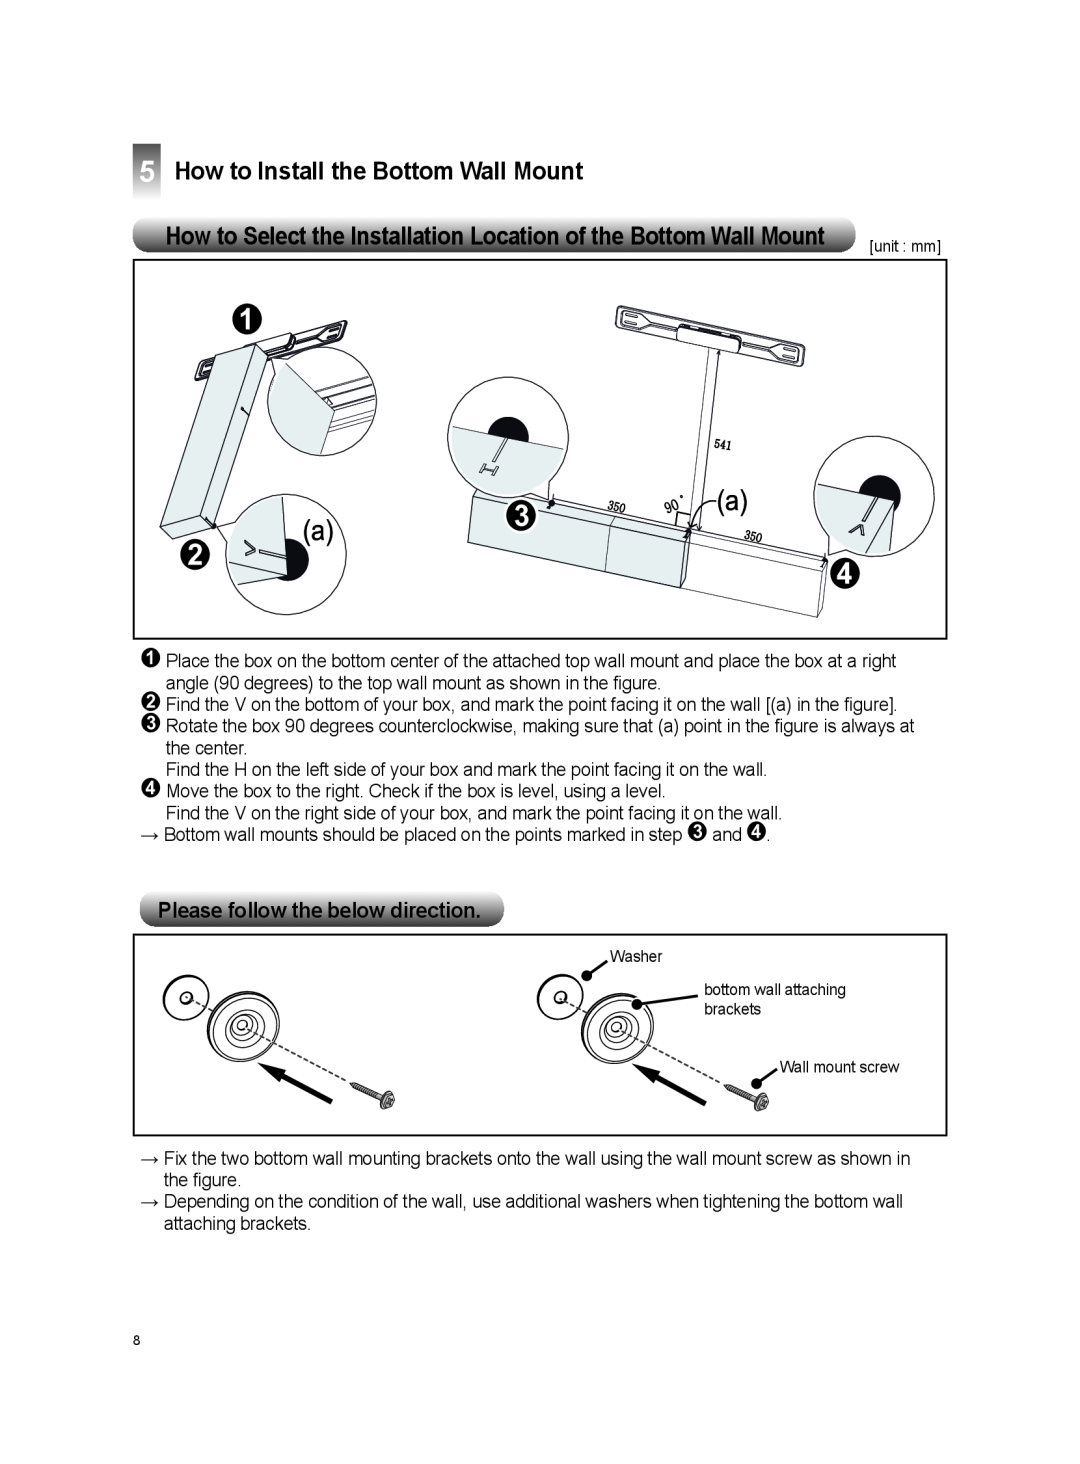 LG Electronics OSW100 How to S elect the Installation Location of the Bottom Wall Mount, Washer, Wall mount screw 